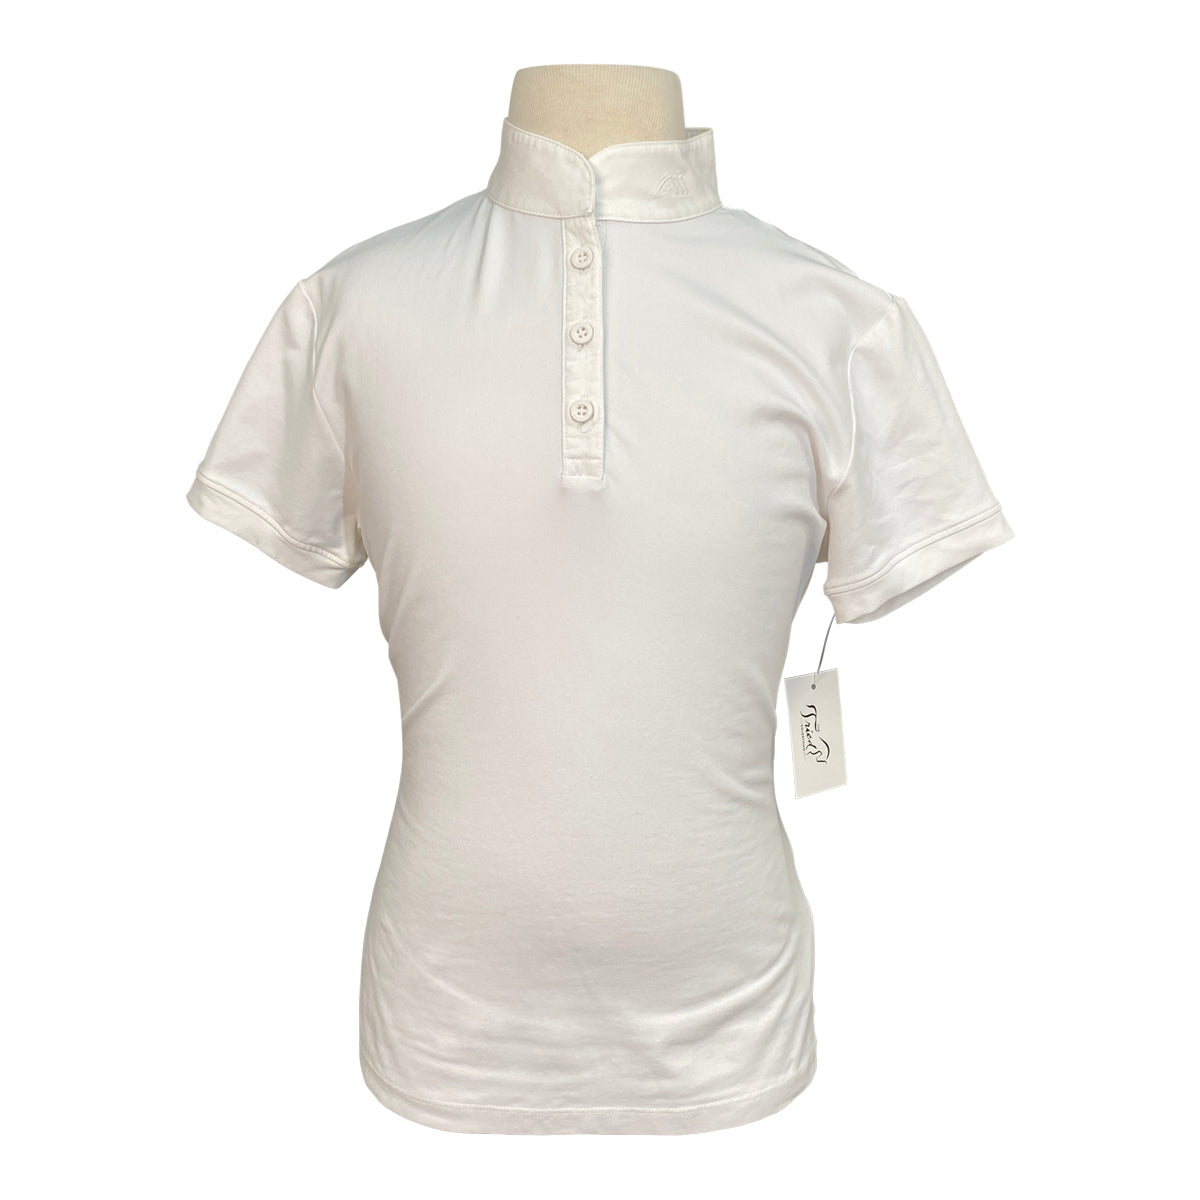 Equiline Kids Short Sleeve Show Shirt in White